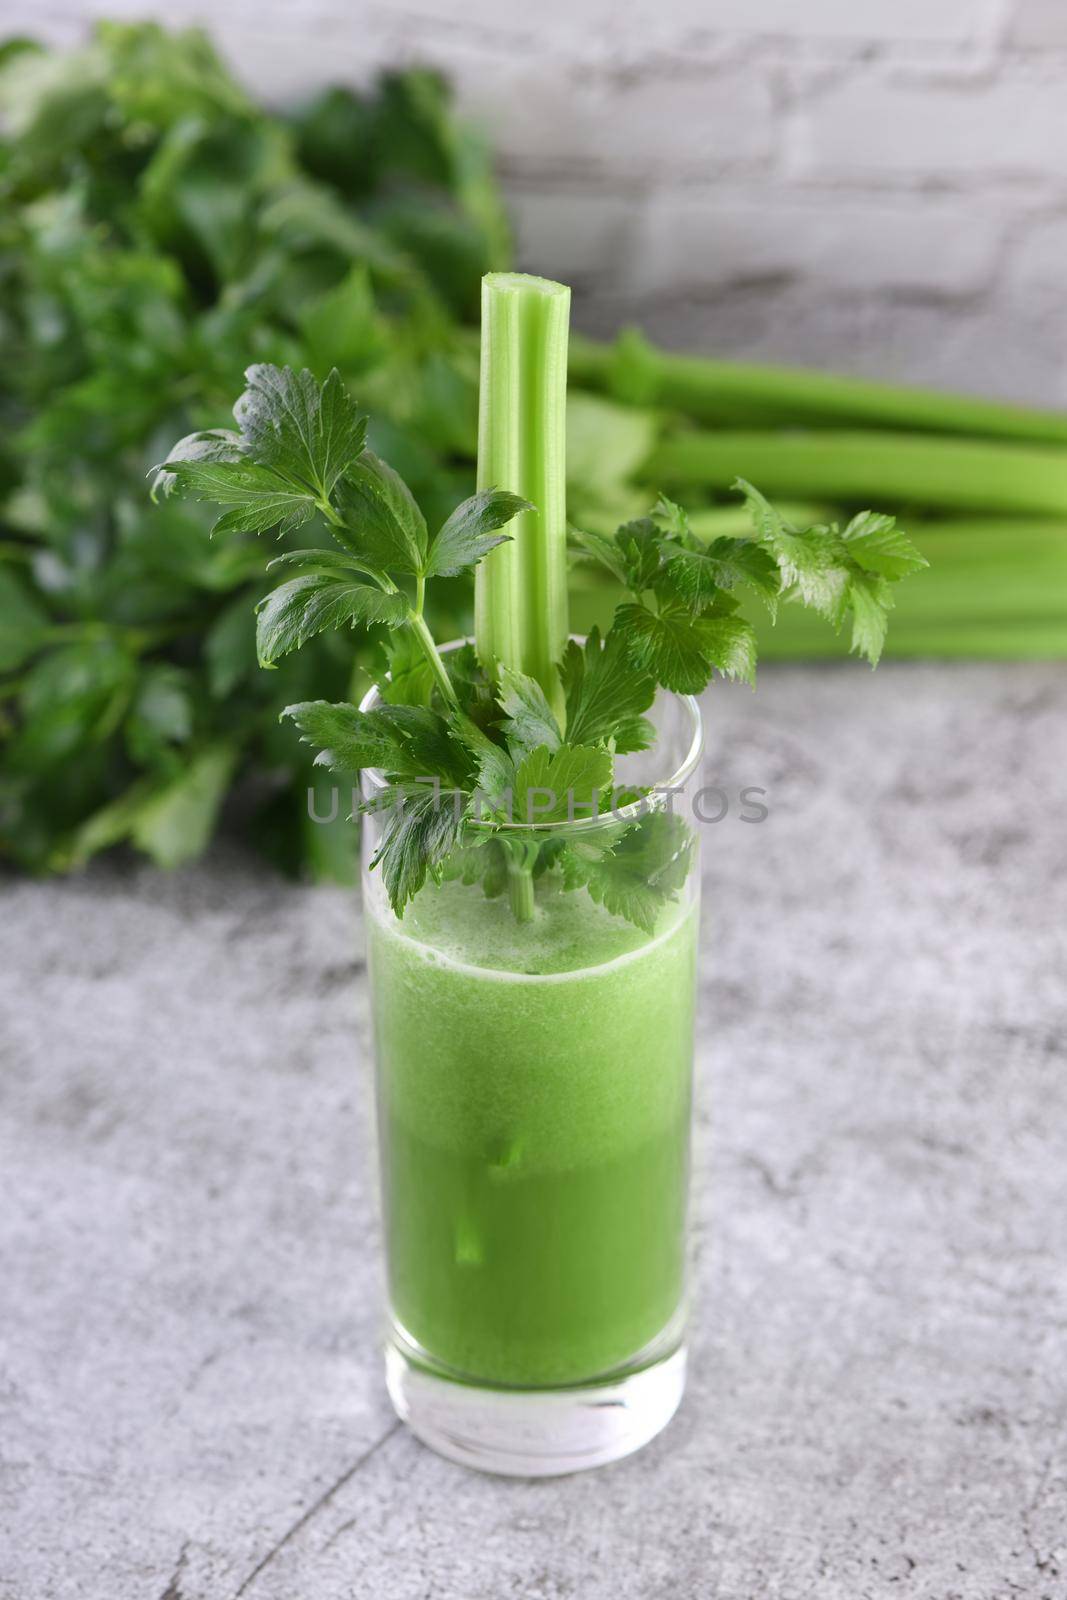 A glass of freshly made celery smoothie. A detox drink for those who care about health.